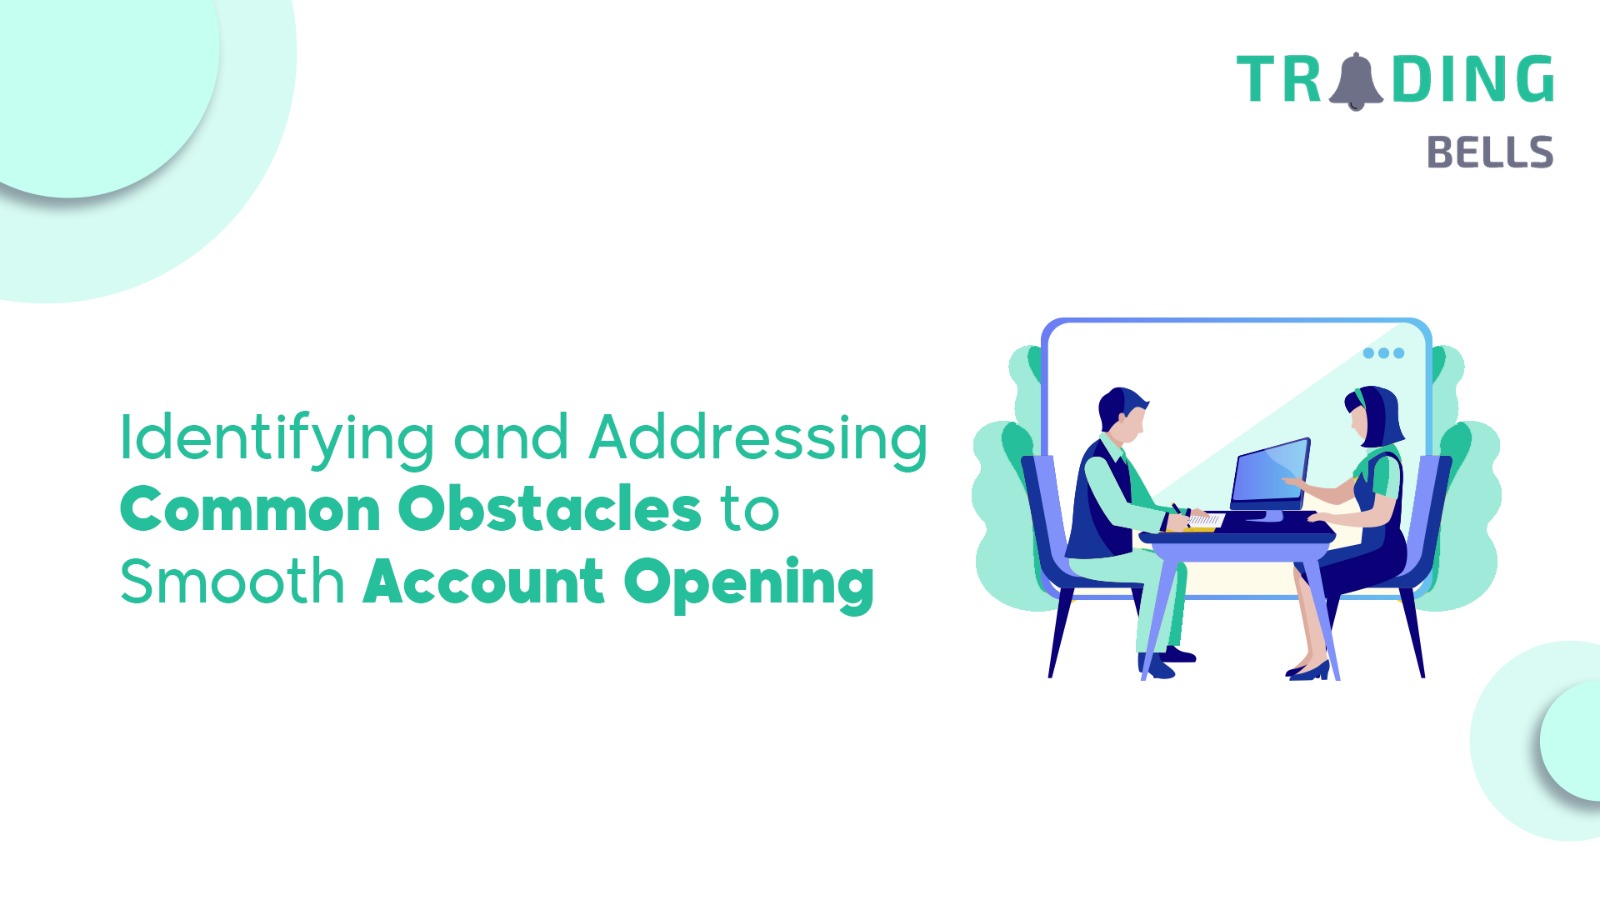 Identifying and Addressing Common Obstacles to Smooth Account Opening